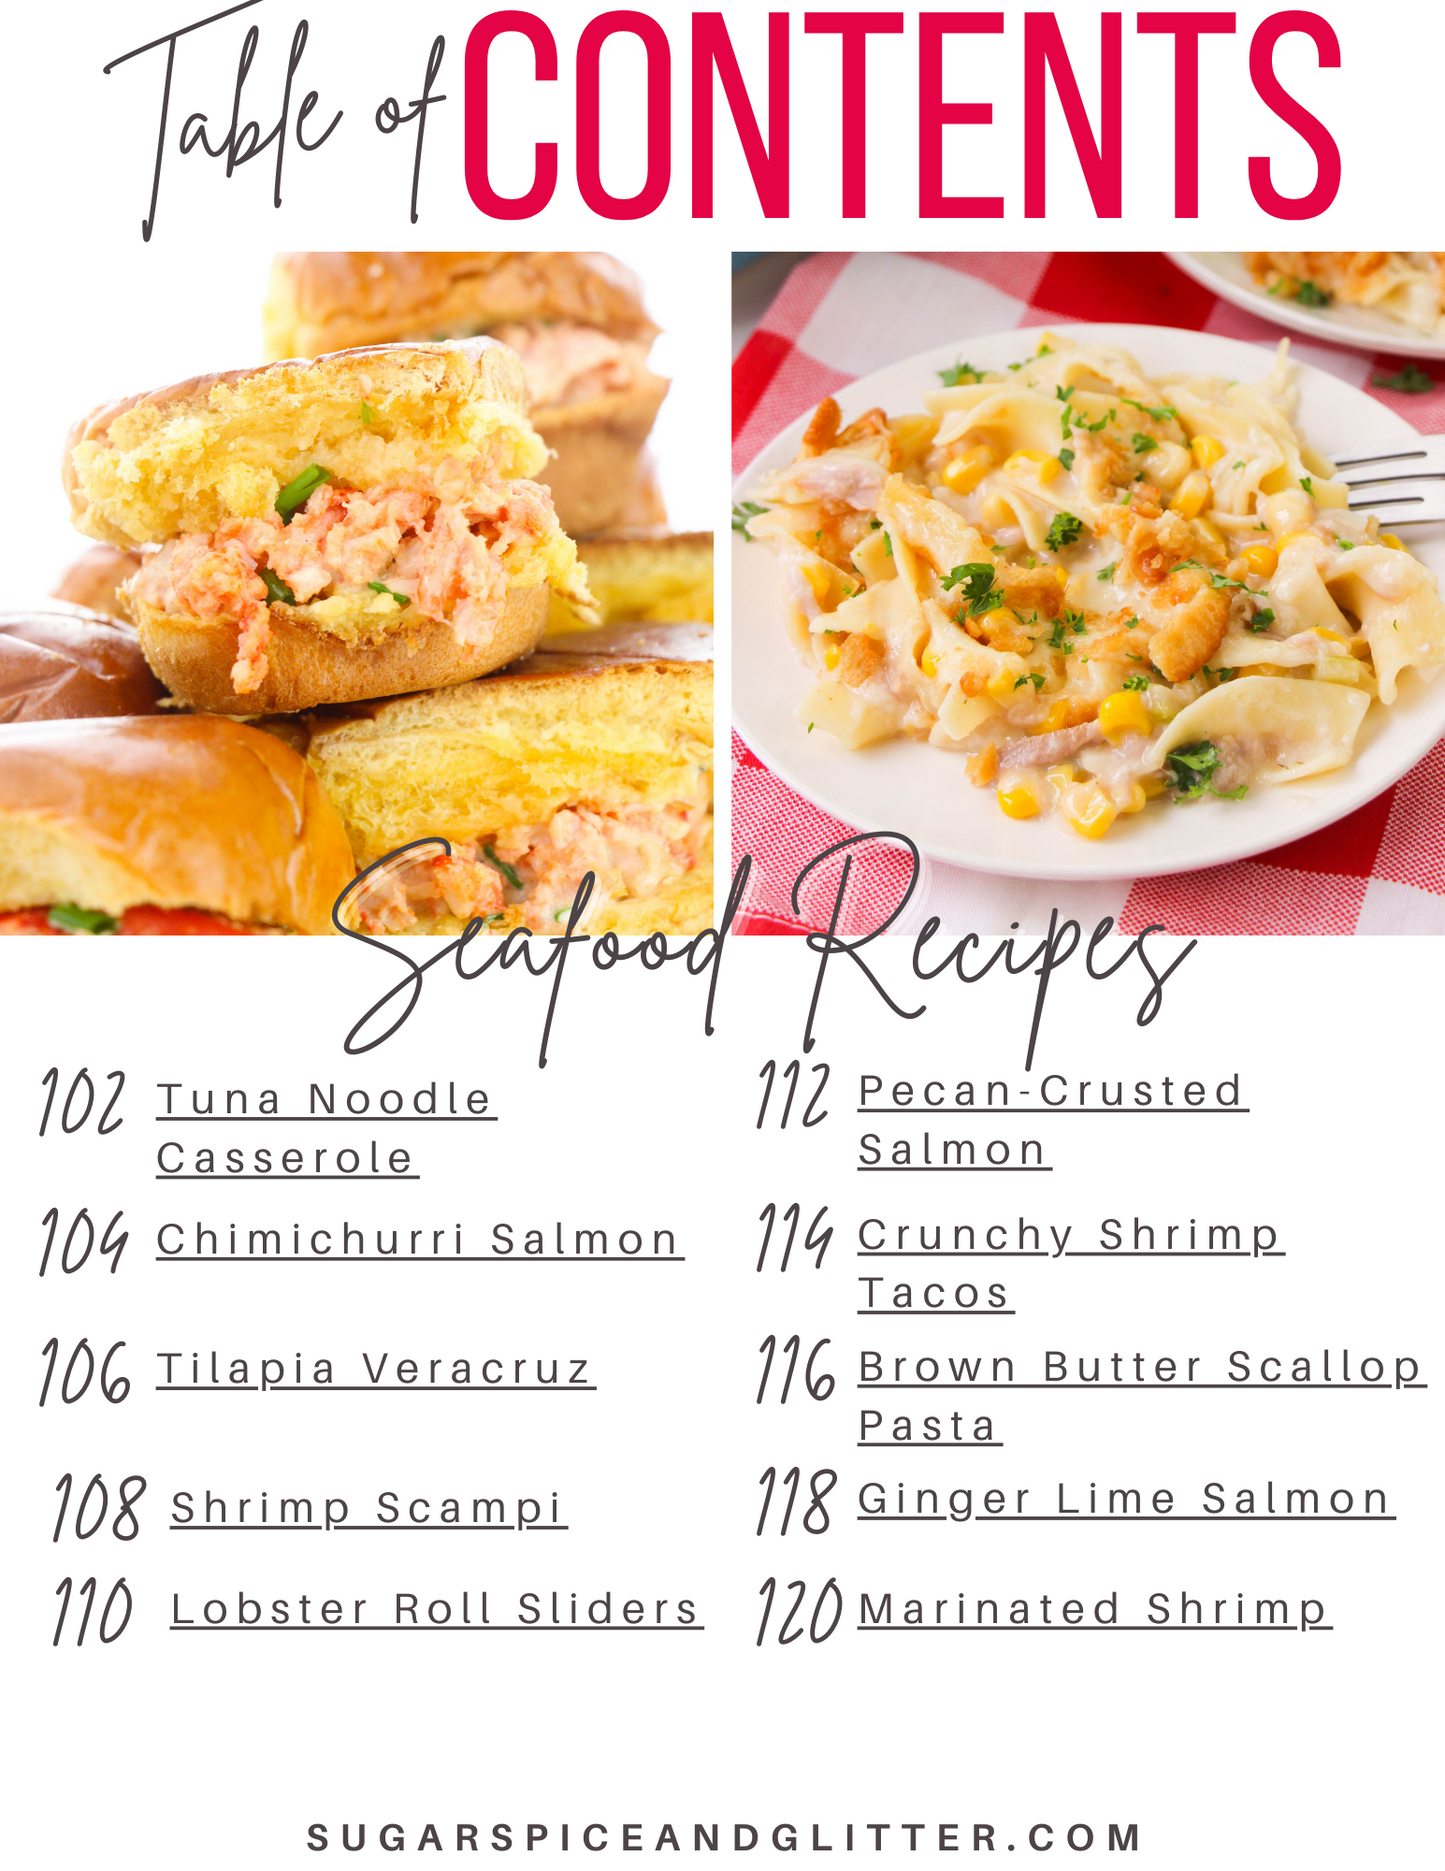 50 Family Favorites: Easy and Delicious Meals the Whole Family will Love